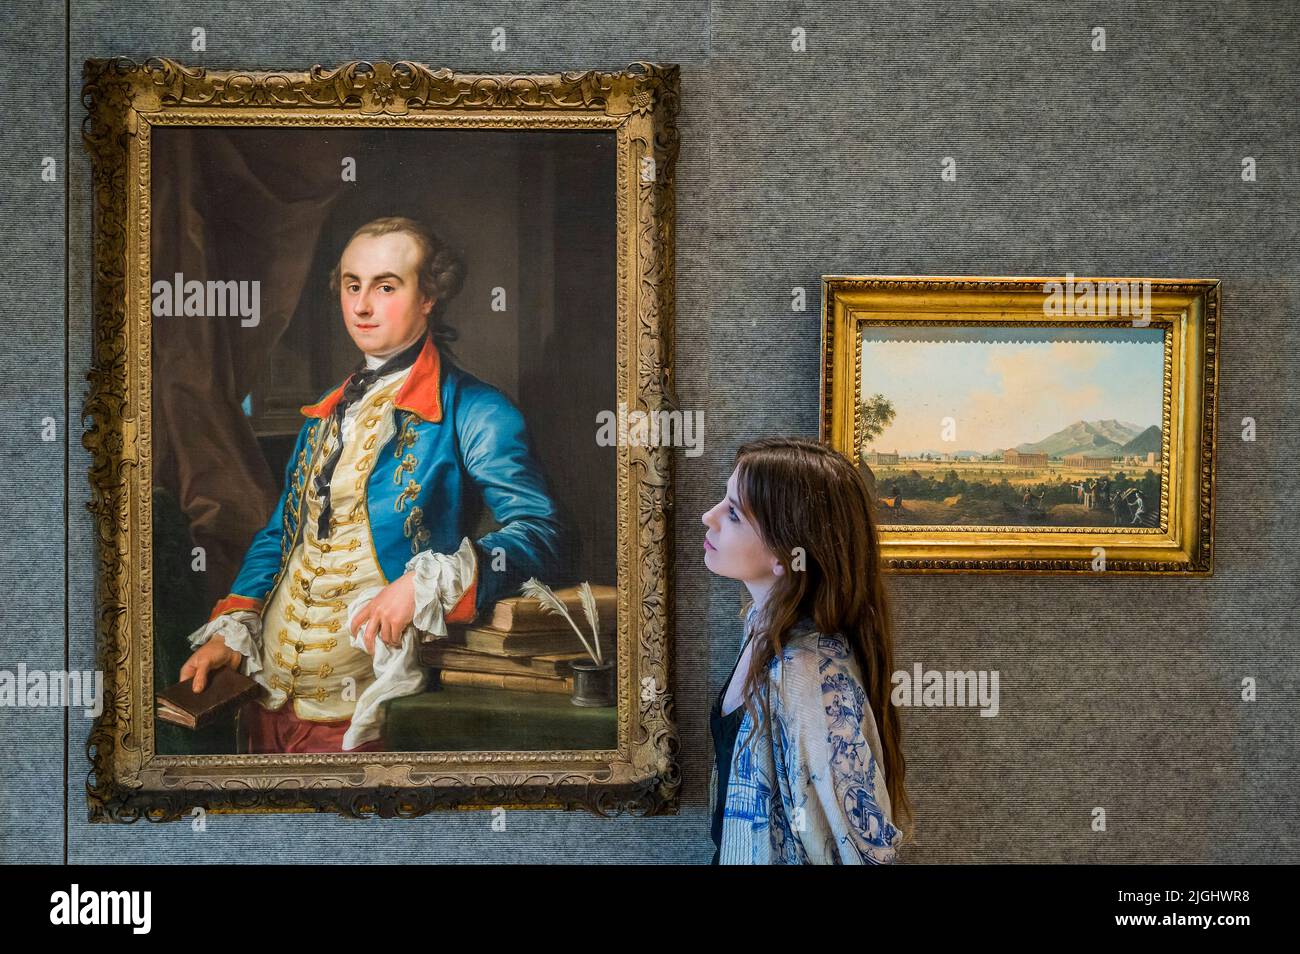 London, UK. 11th July, 2022. Portrait of Edward Solly by Pompeo Batoni. Estimate: £120,000-180,000 with other works - The Grand Tour sale at Bonhams New Bond Street. The sale itself will take place on Thursday 14 July in London Credit: Guy Bell/Alamy Live News Stock Photo